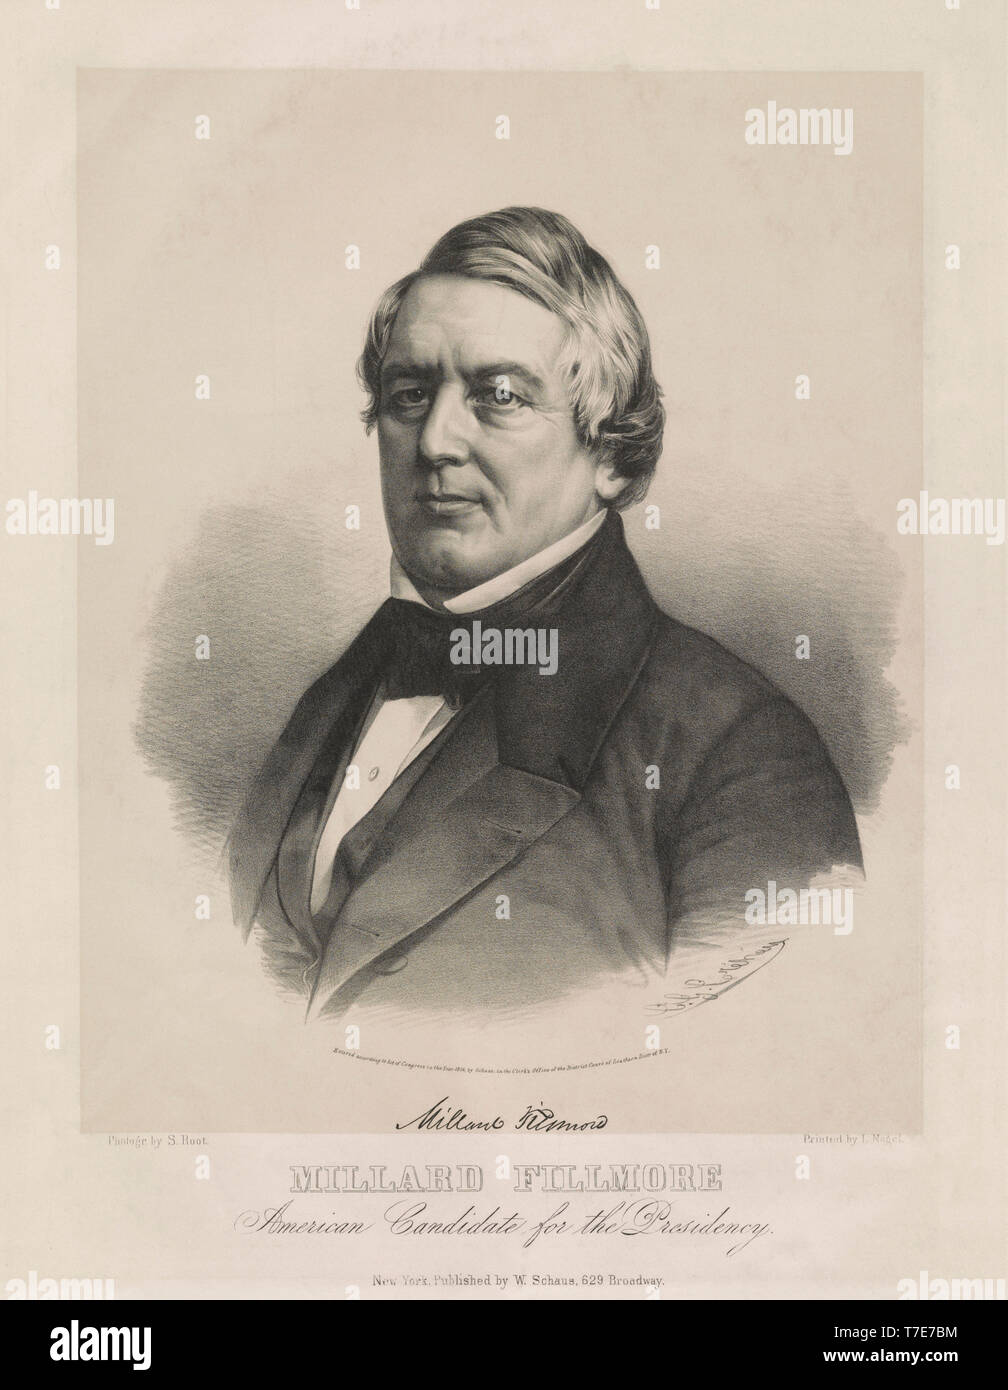 Millard Fillmore, American Candidate for the Presidency, from a Photograph by S. Root, Printed by L. Nagel, Published by W. Schaus, New York, NY, 1856 Stock Photo